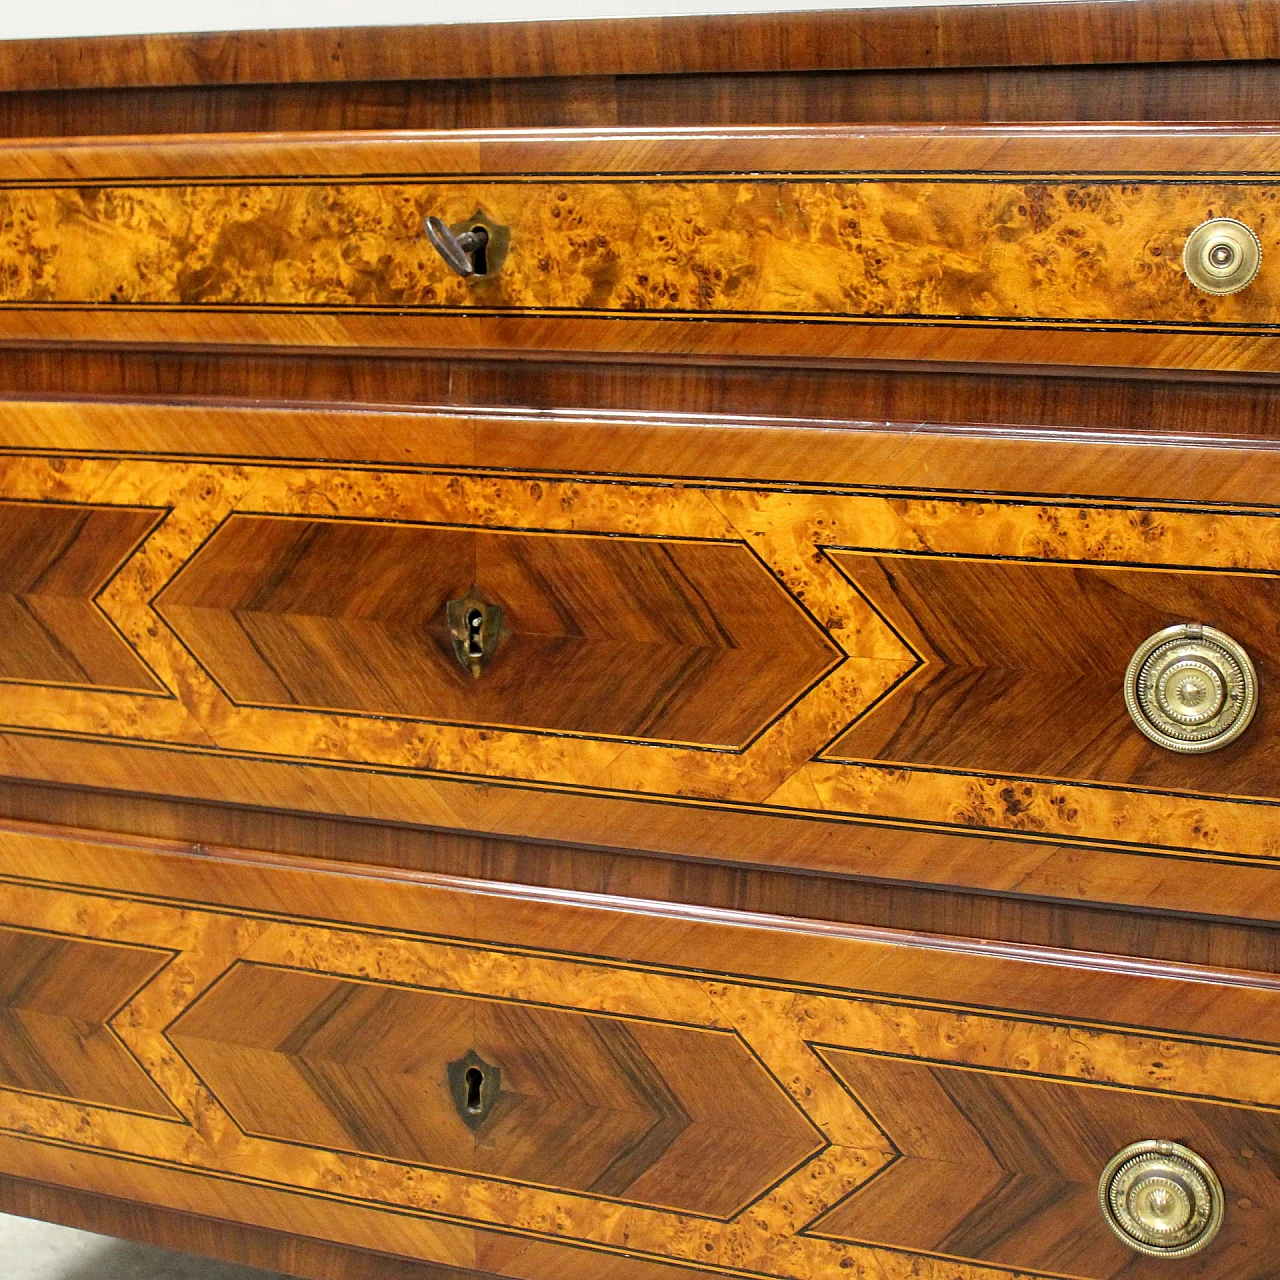 Emilian Louis XVI walnut and cherry commode with inlays, 18th century 9